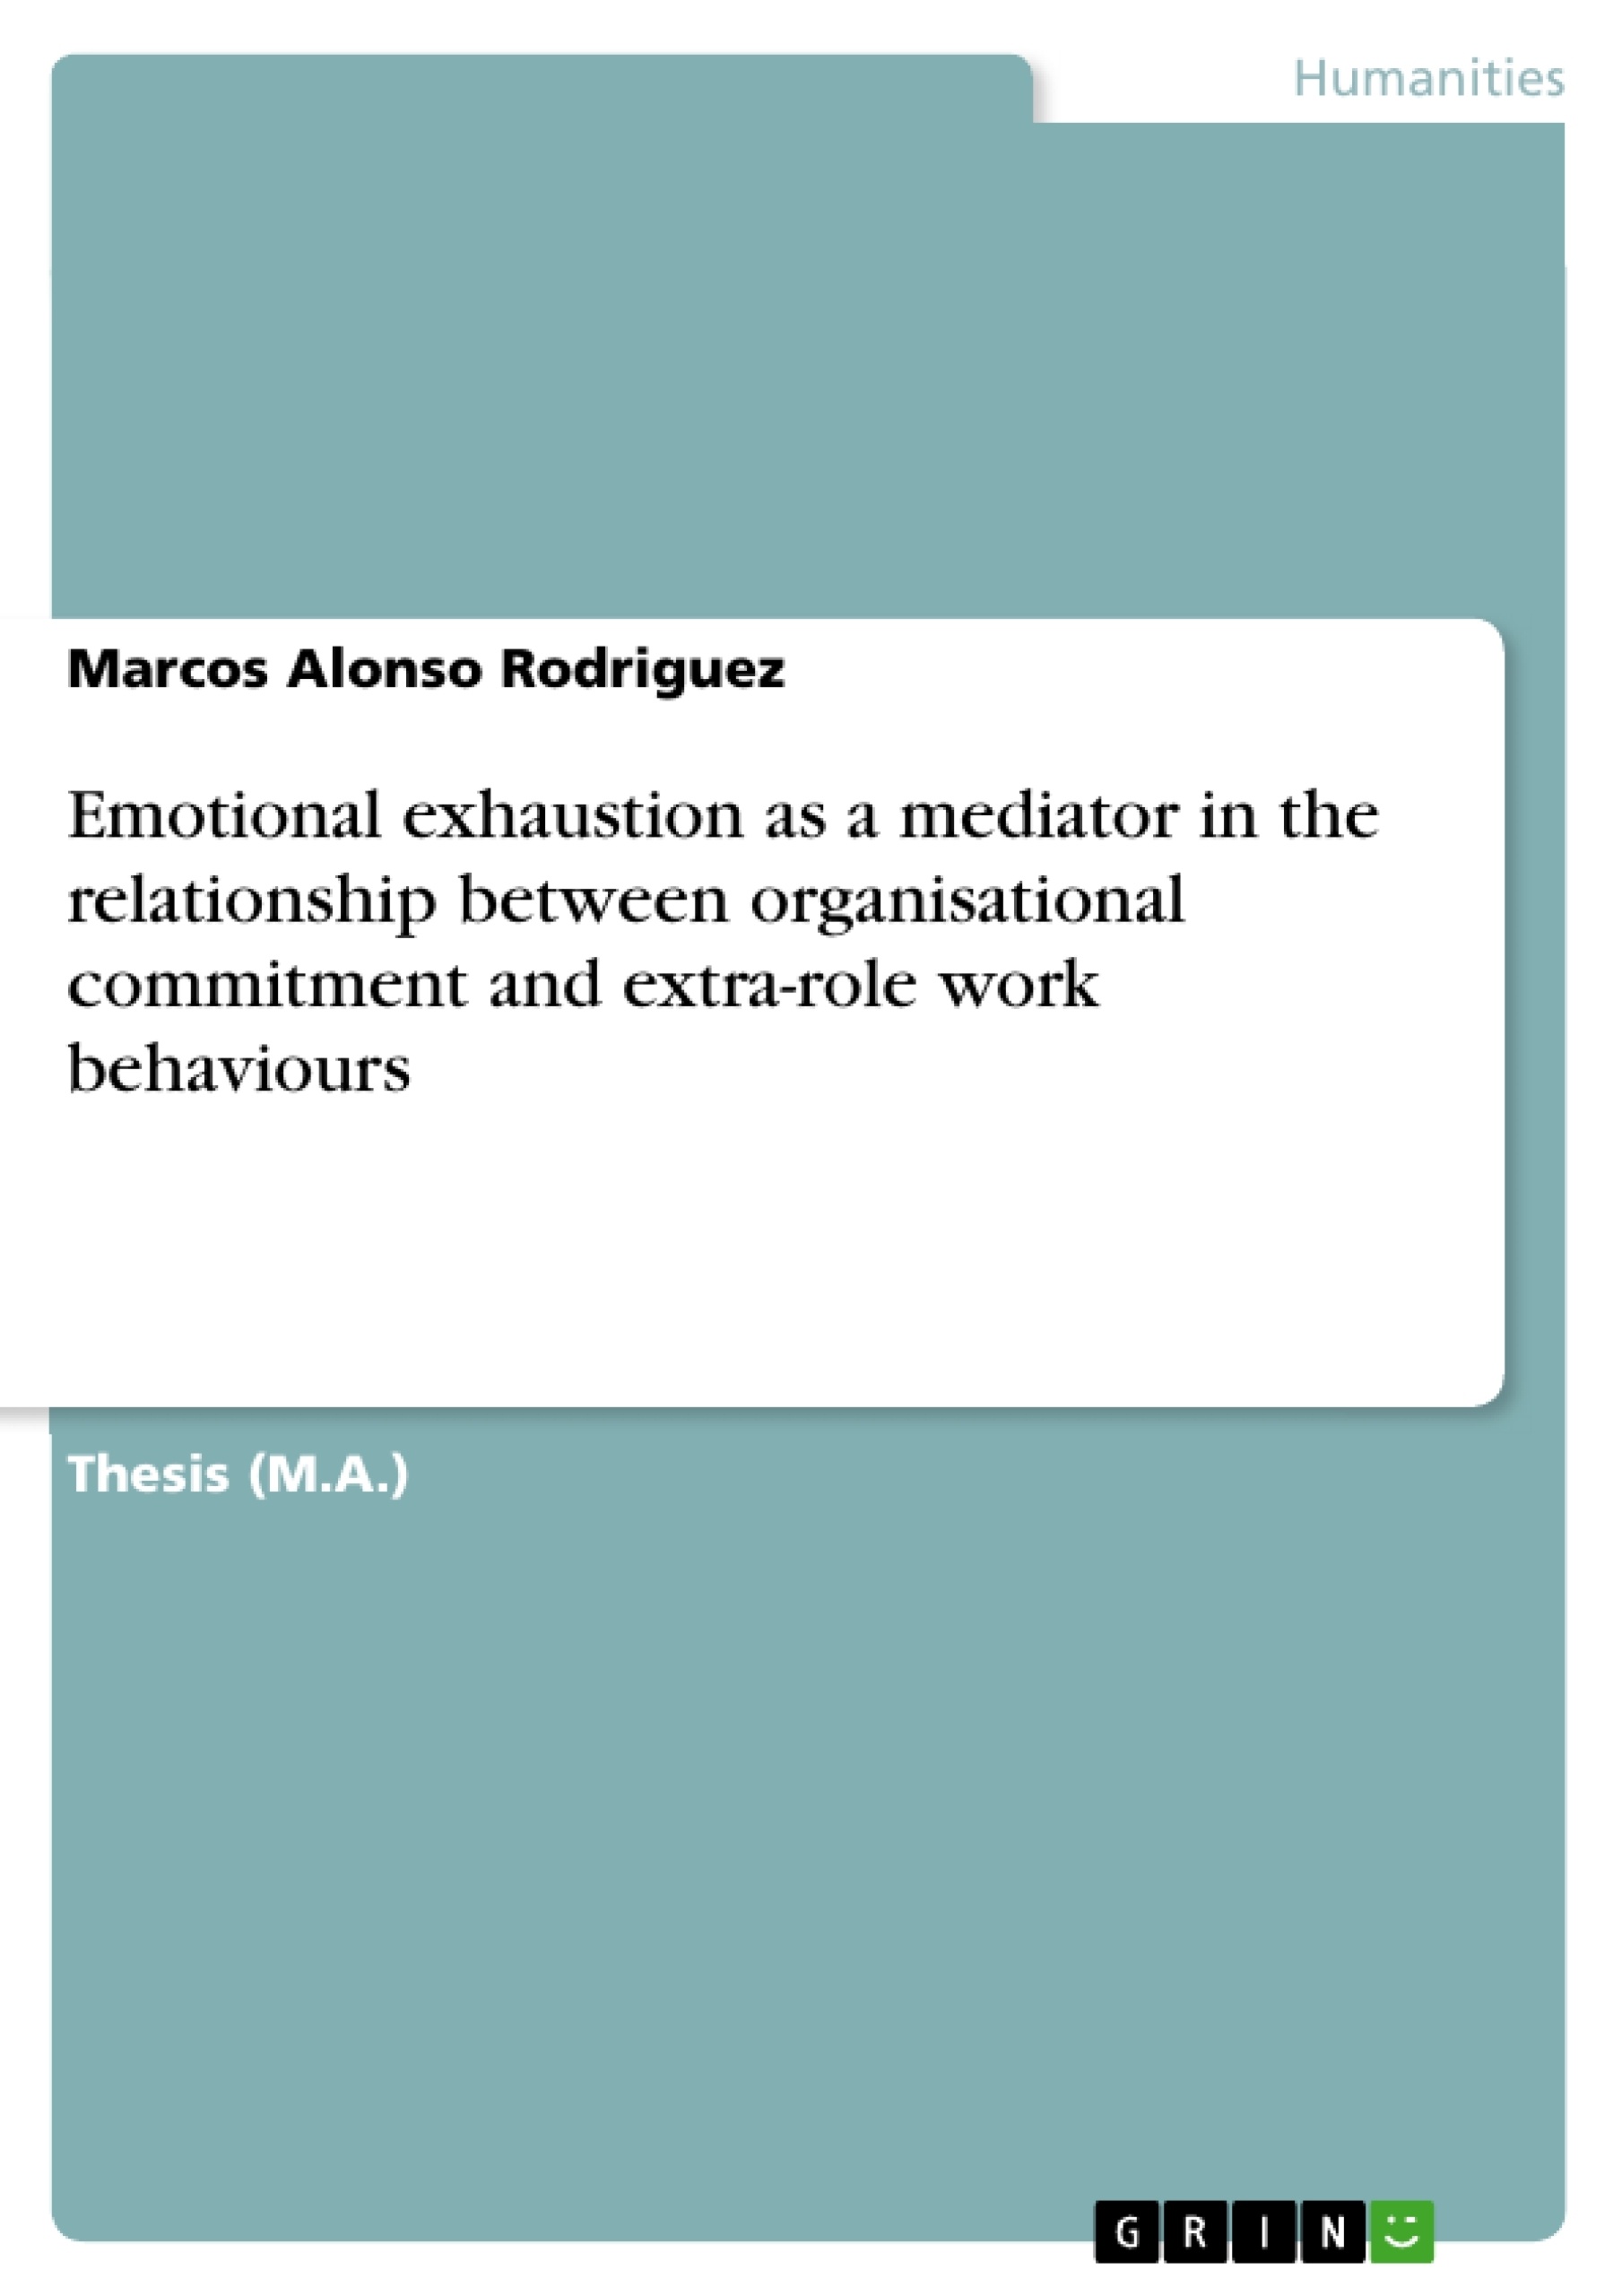 Título: Emotional exhaustion as a mediator in the relationship between organisational commitment and extra-role work behaviours